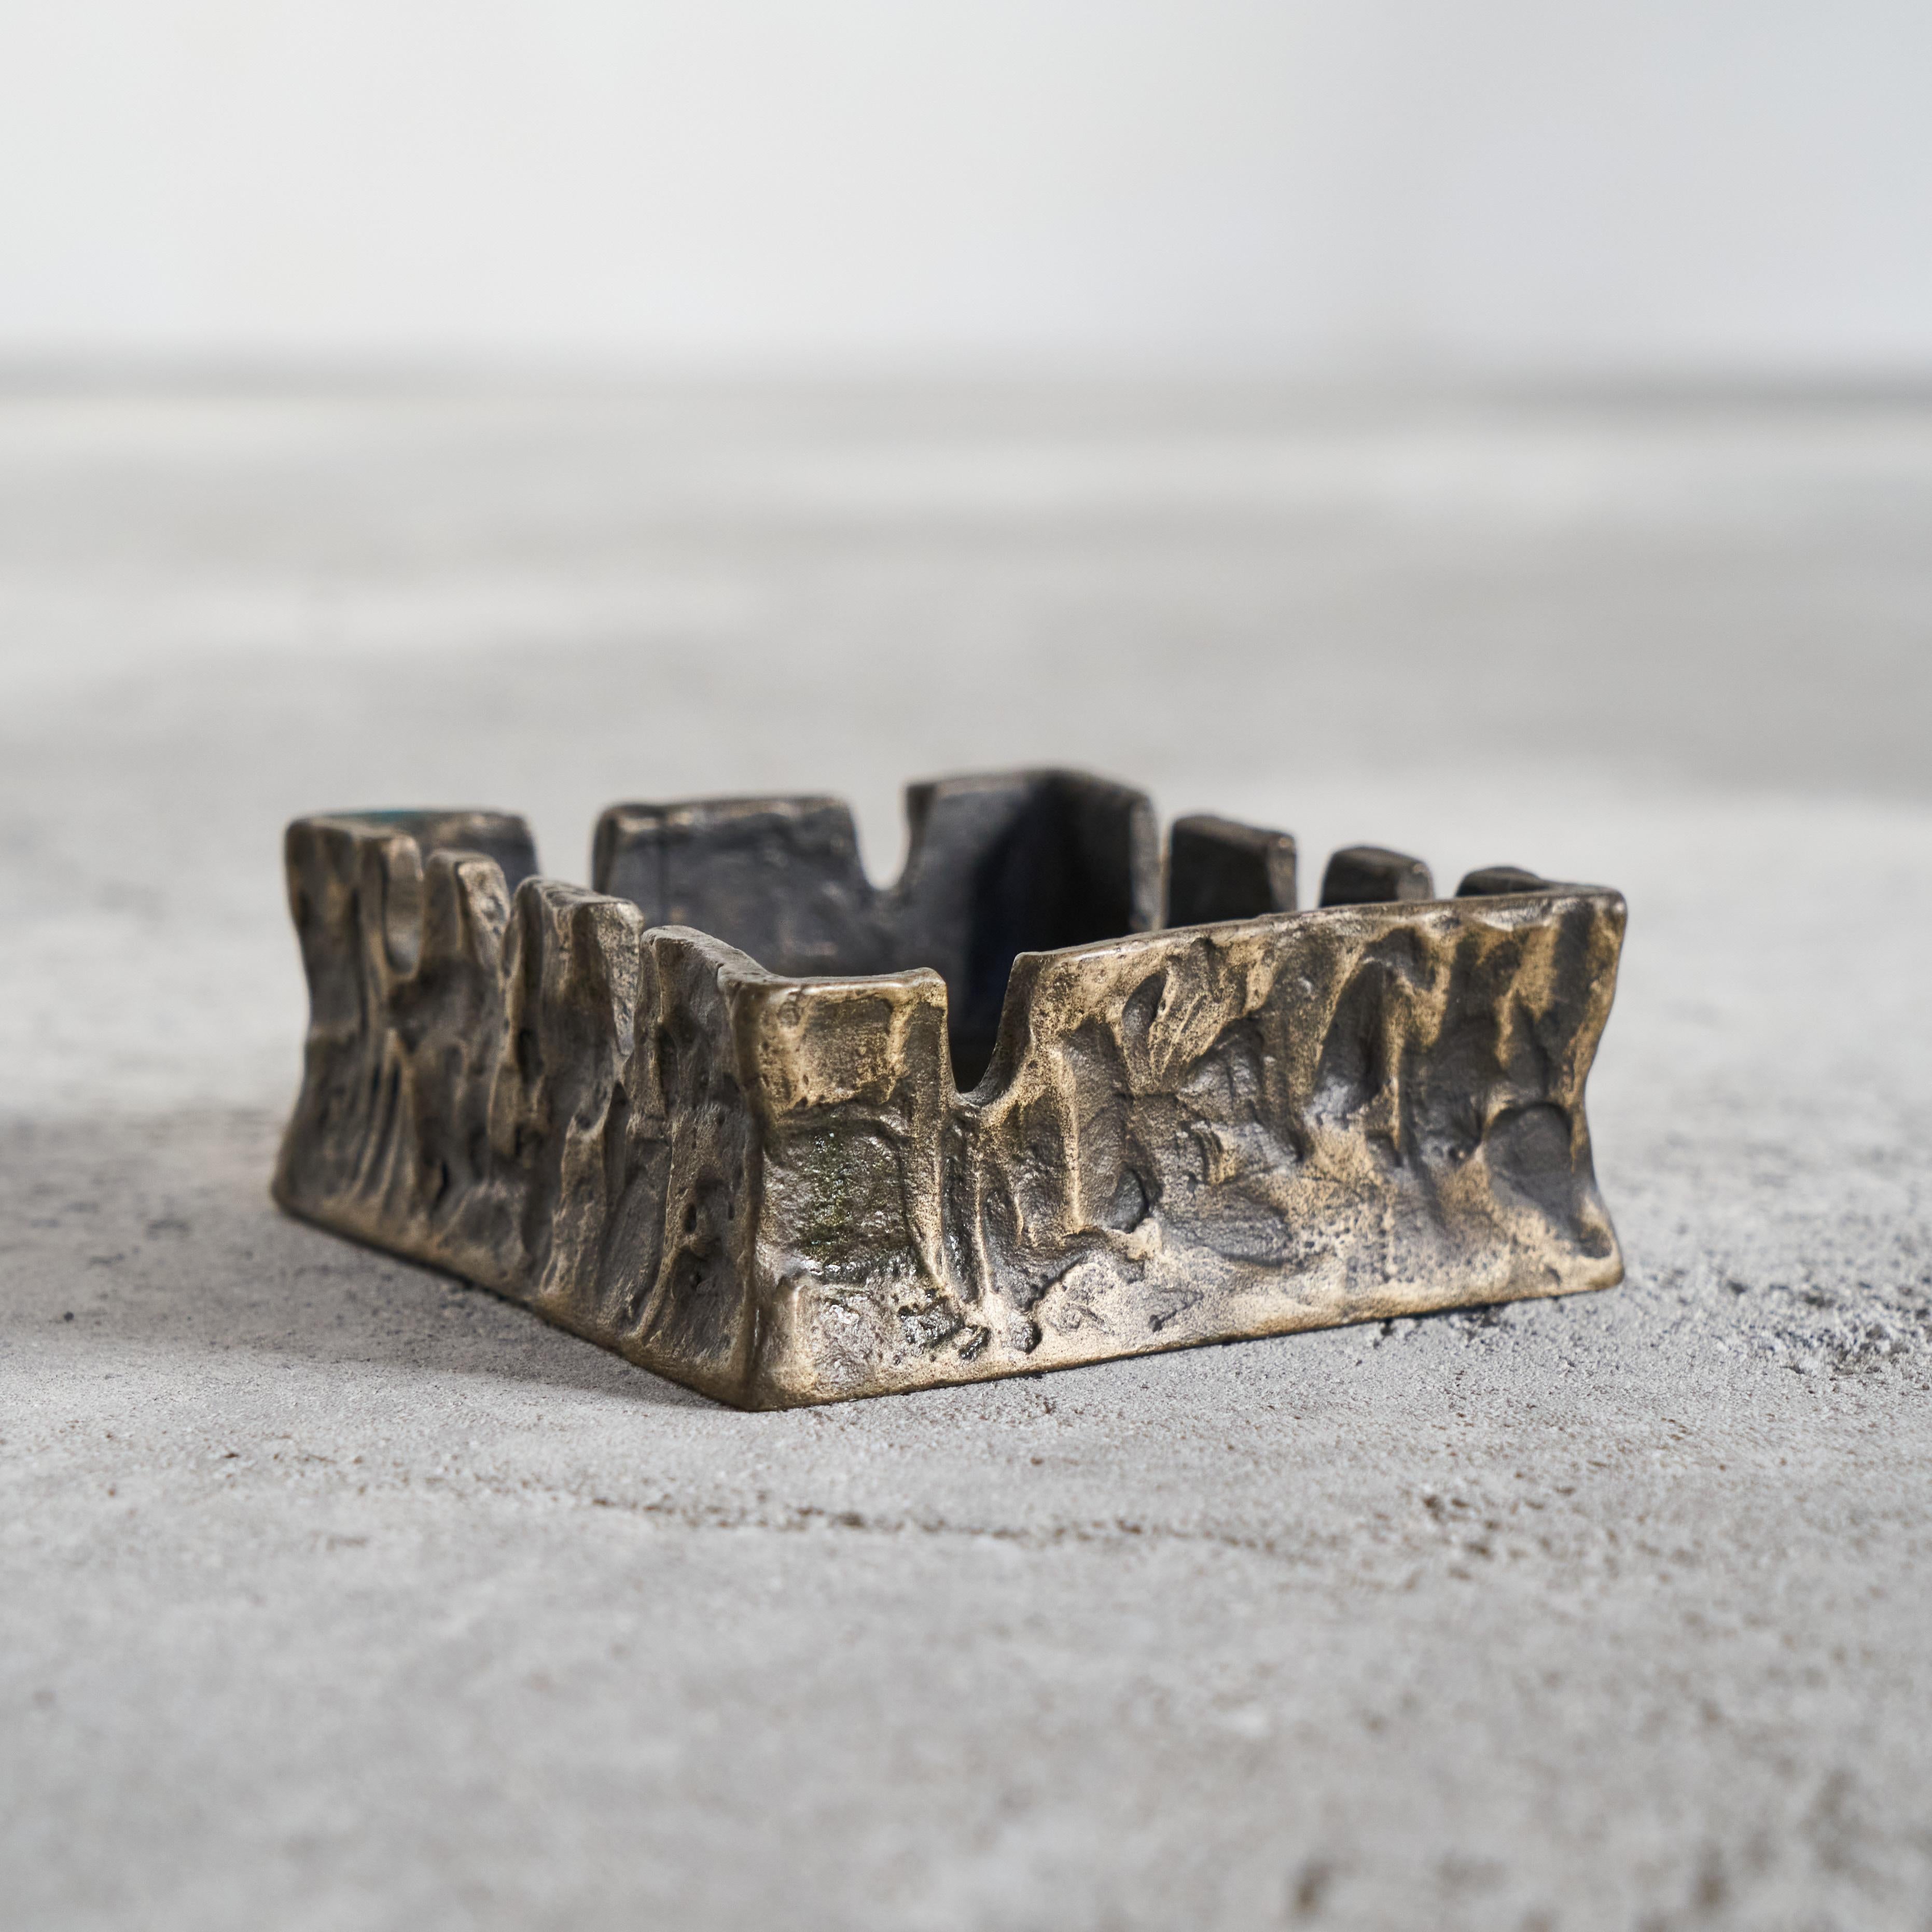 Brutalist Vide Poche in Cast Bronze, mid 20th century.

Beautiful and very distinct vide poche in heavy cast bronze. Quintessentially brutalist with rough and hand made shapes and heavy execution. A beautiful piece on your desk, table or sideboard.